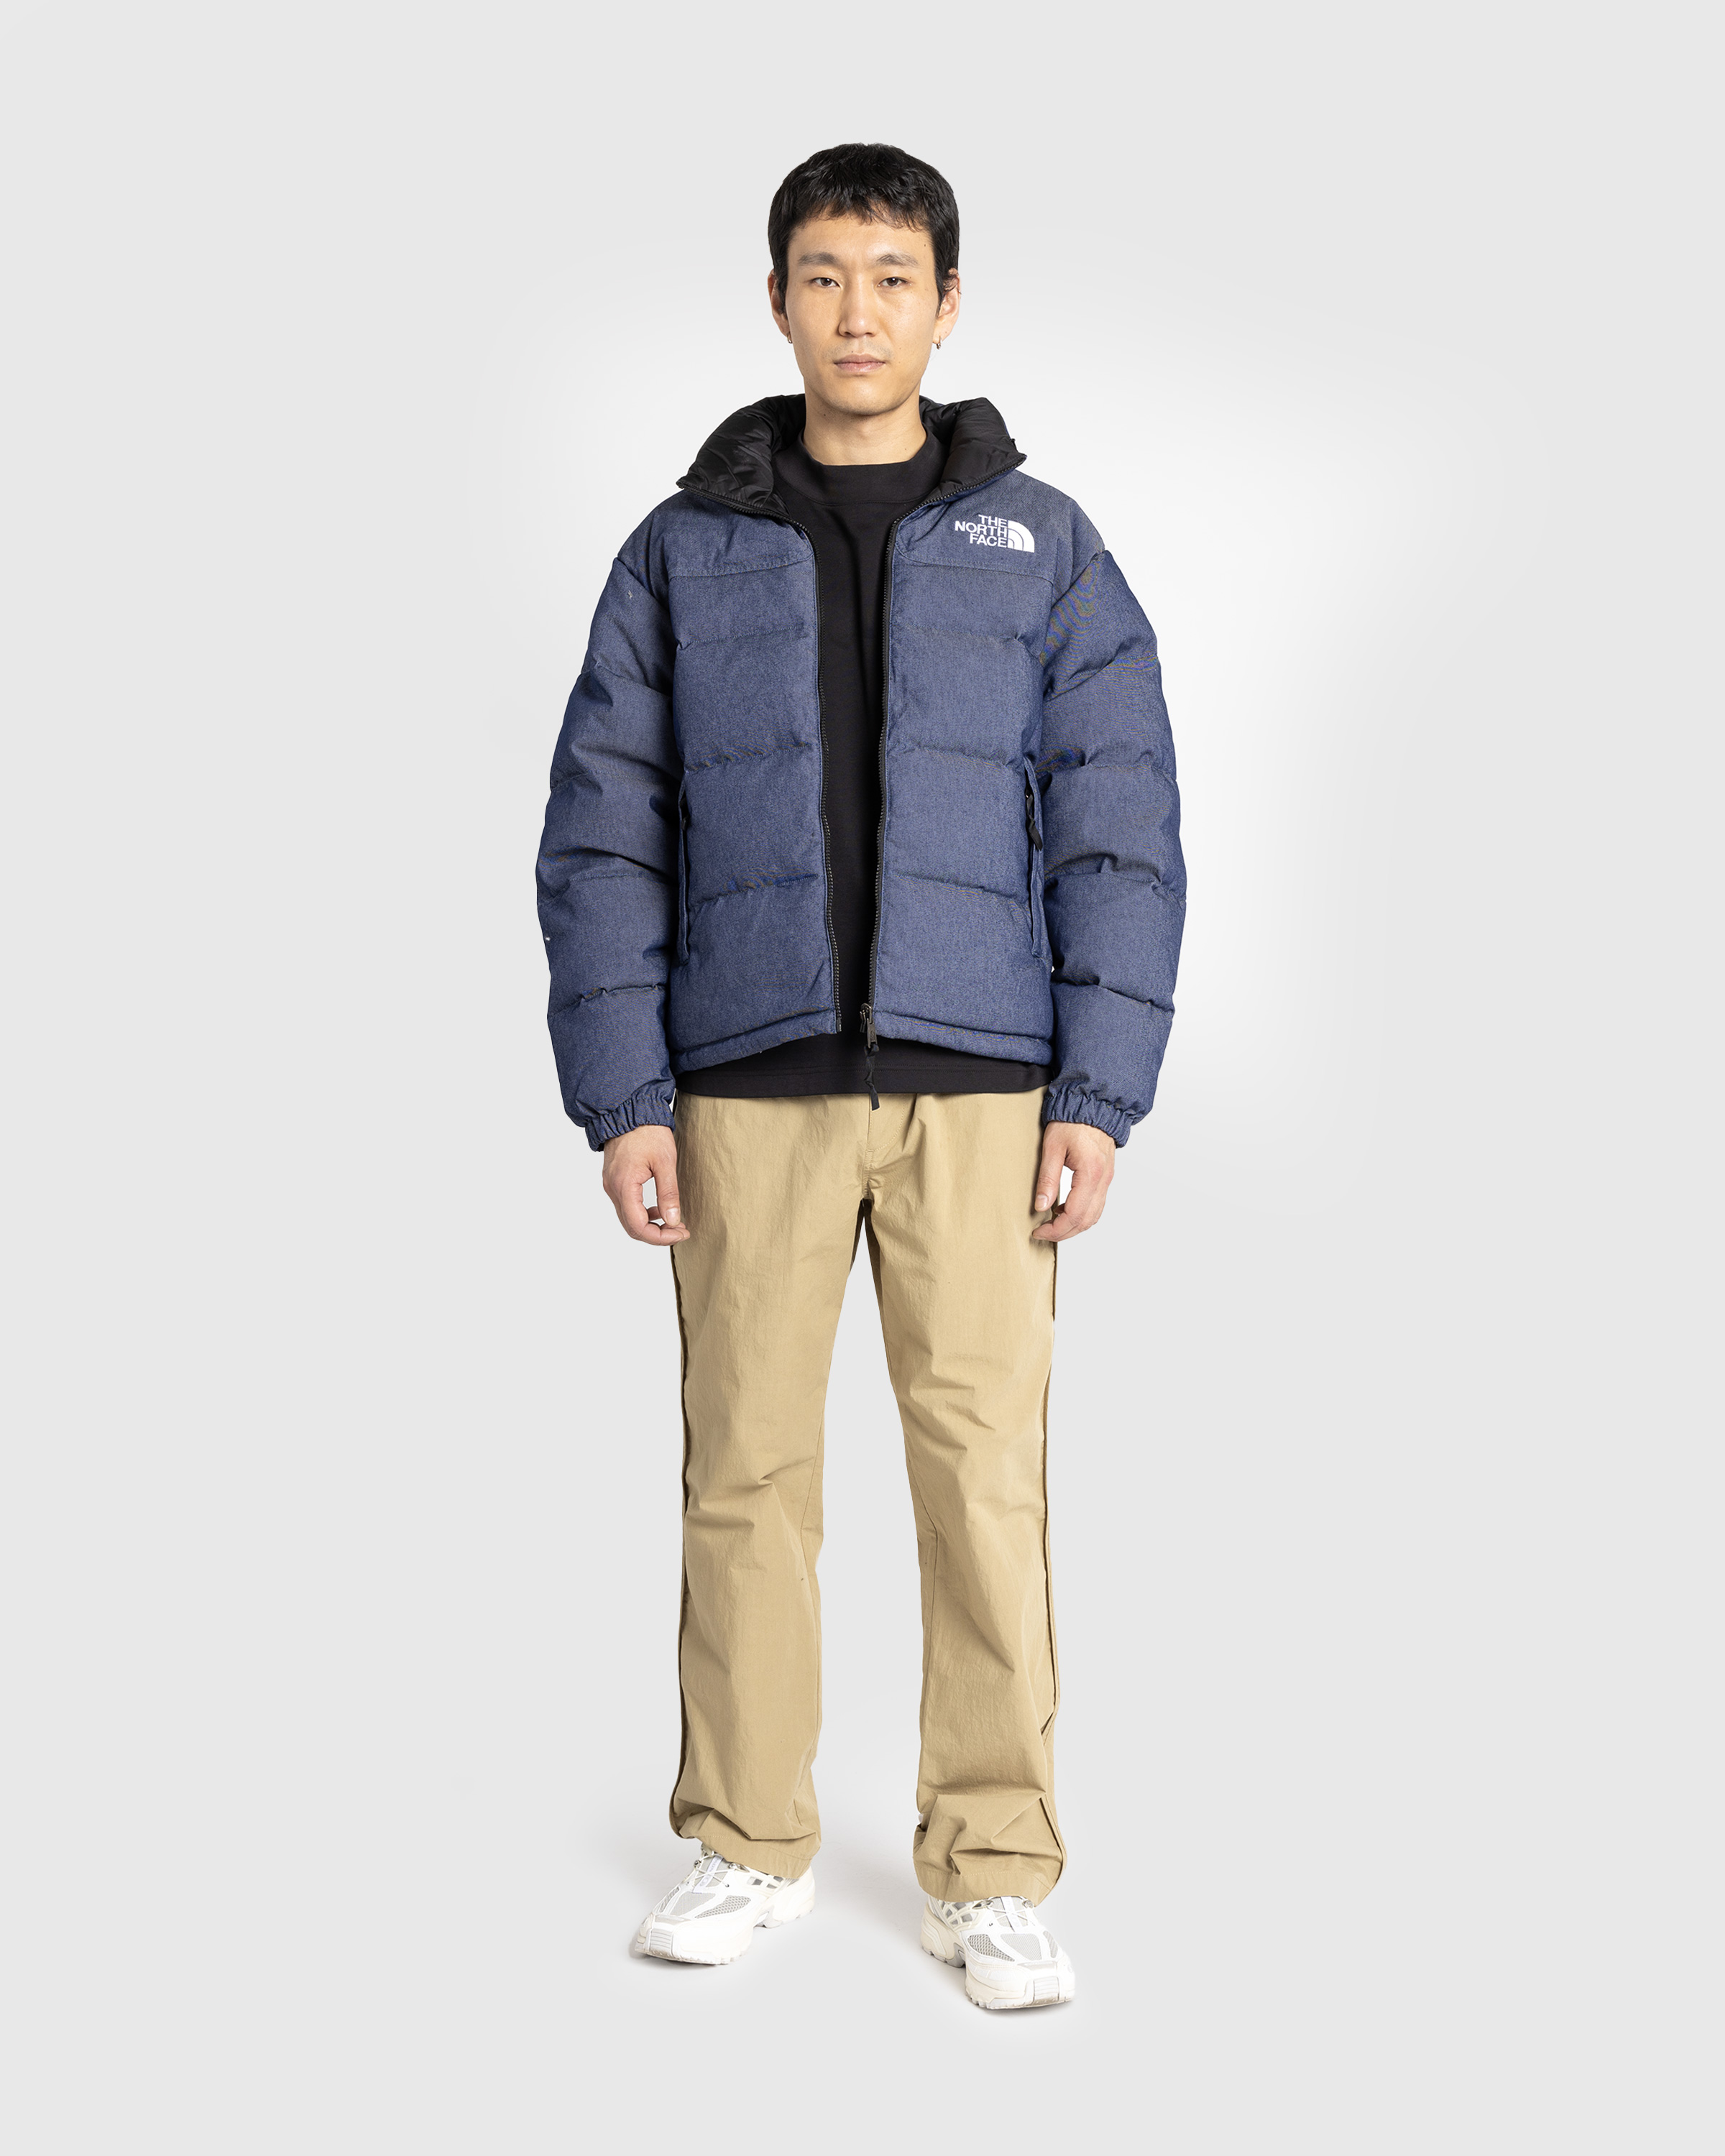 The North Face – ’92 Reversible Nuptse Jacket Sulphur Moss/Coal Brown-2 - Outerwear - Blue - Image 4